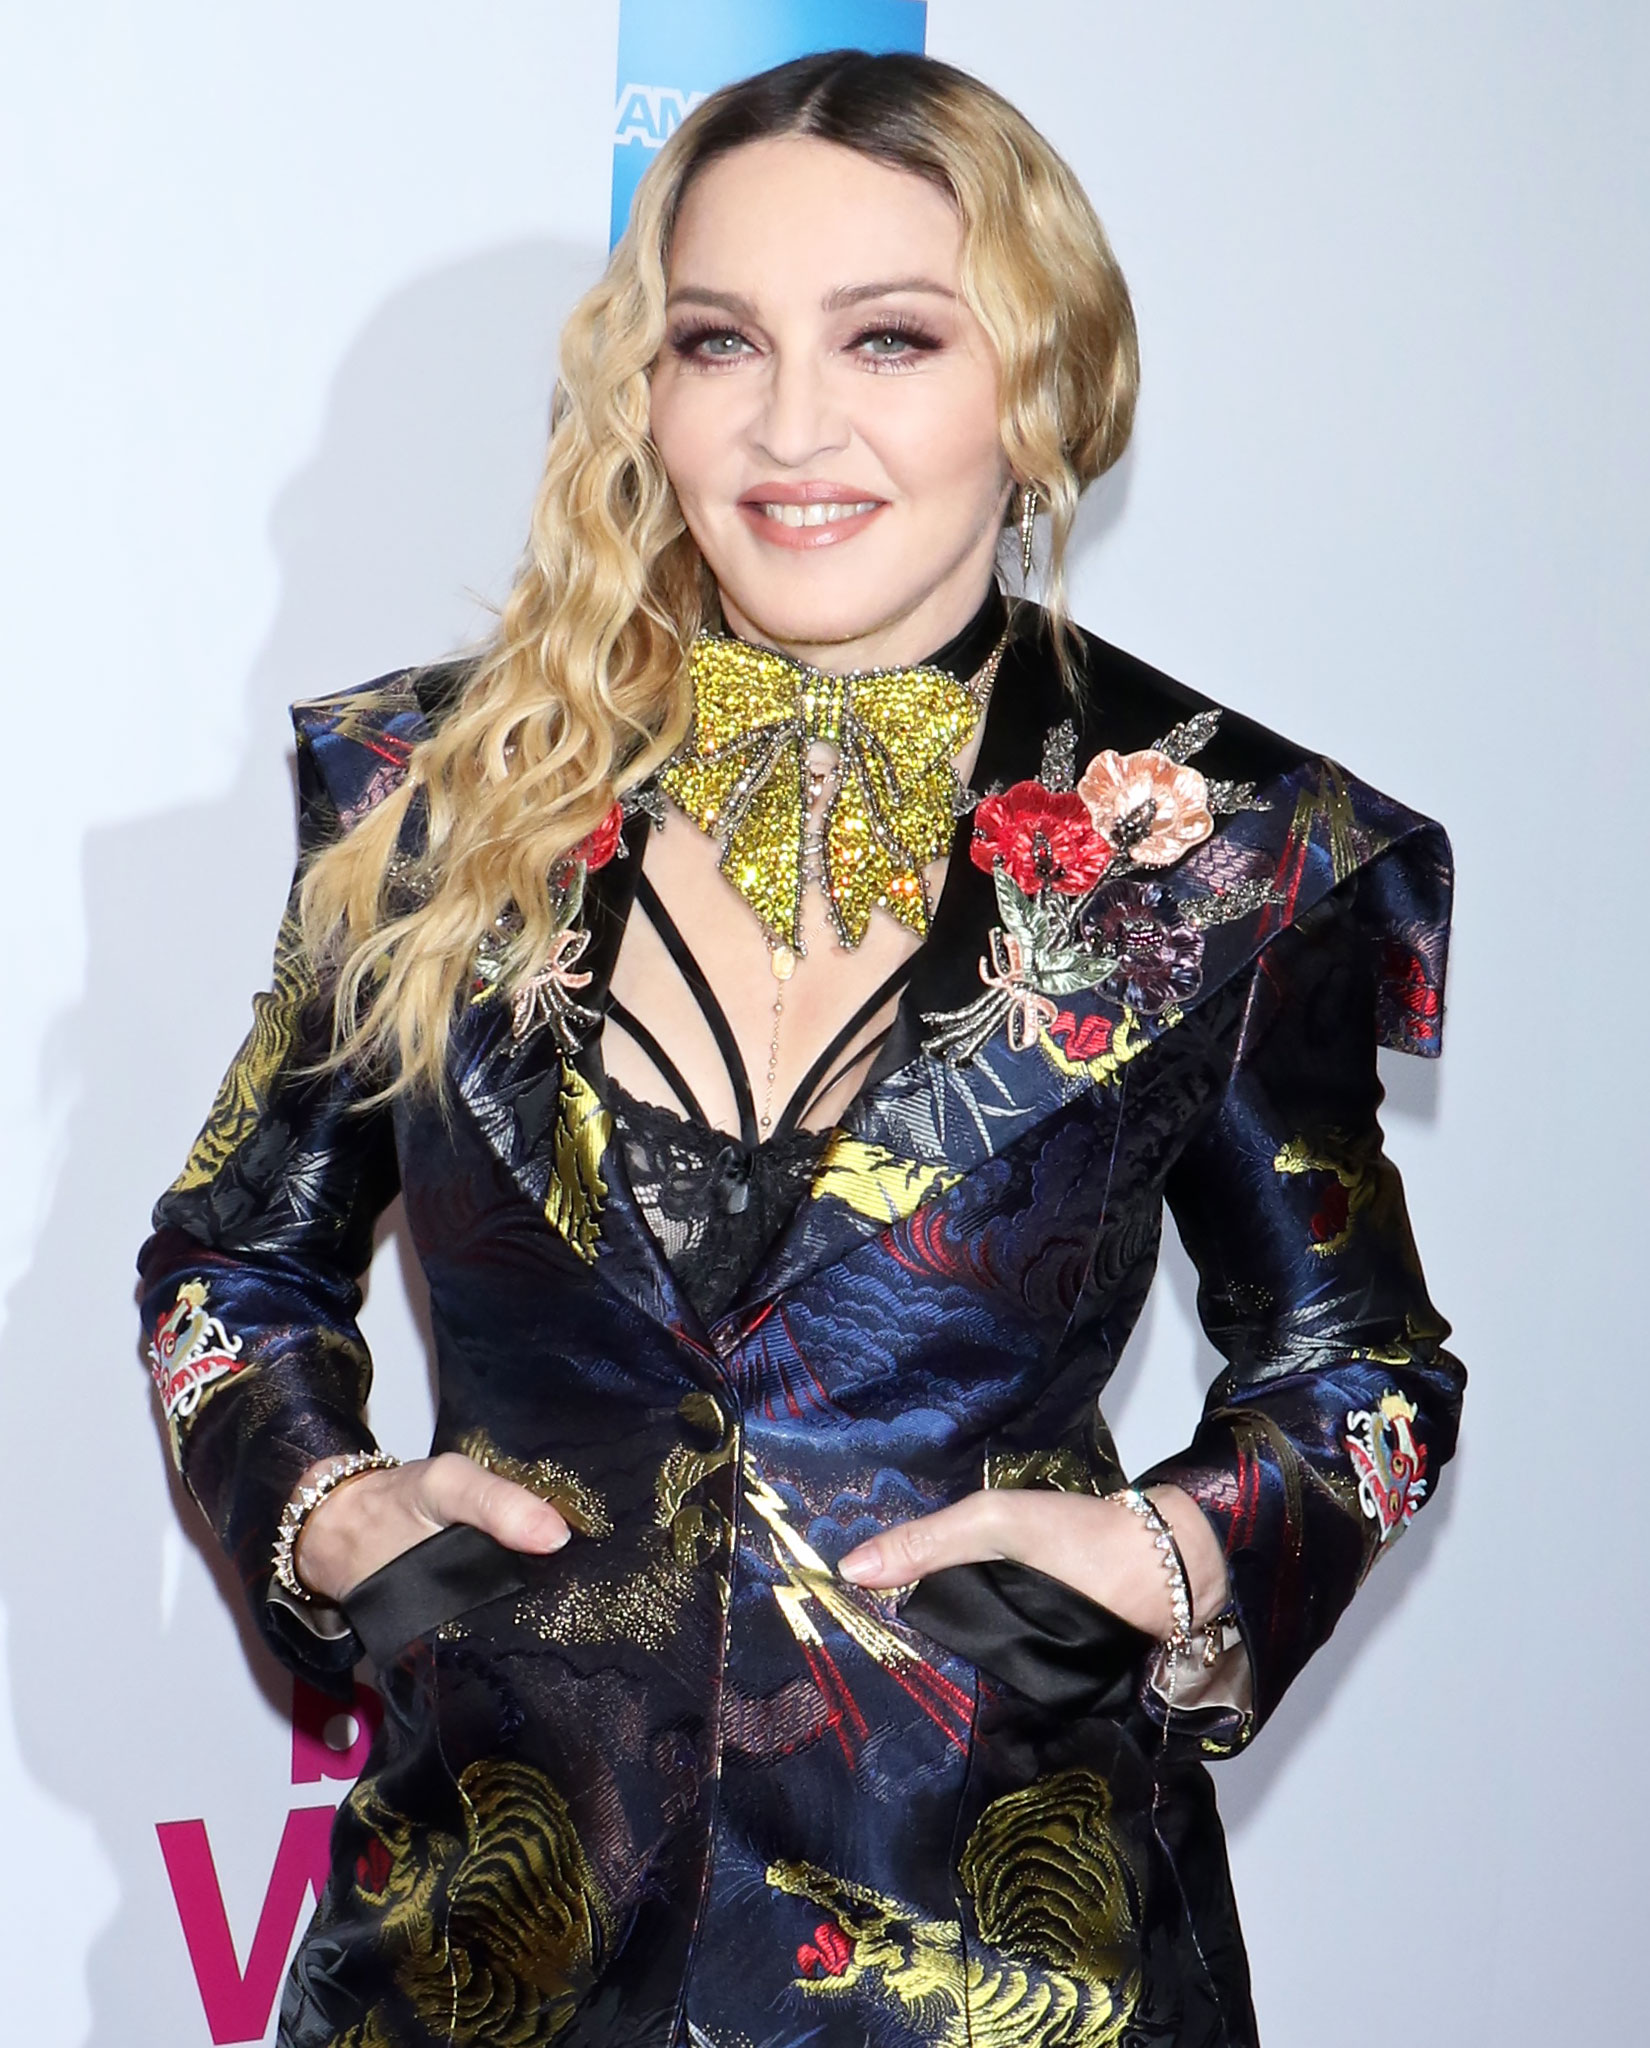 Madonna Gives Rare Look at 6 Kids in Family Video: 'Giving Thanks'